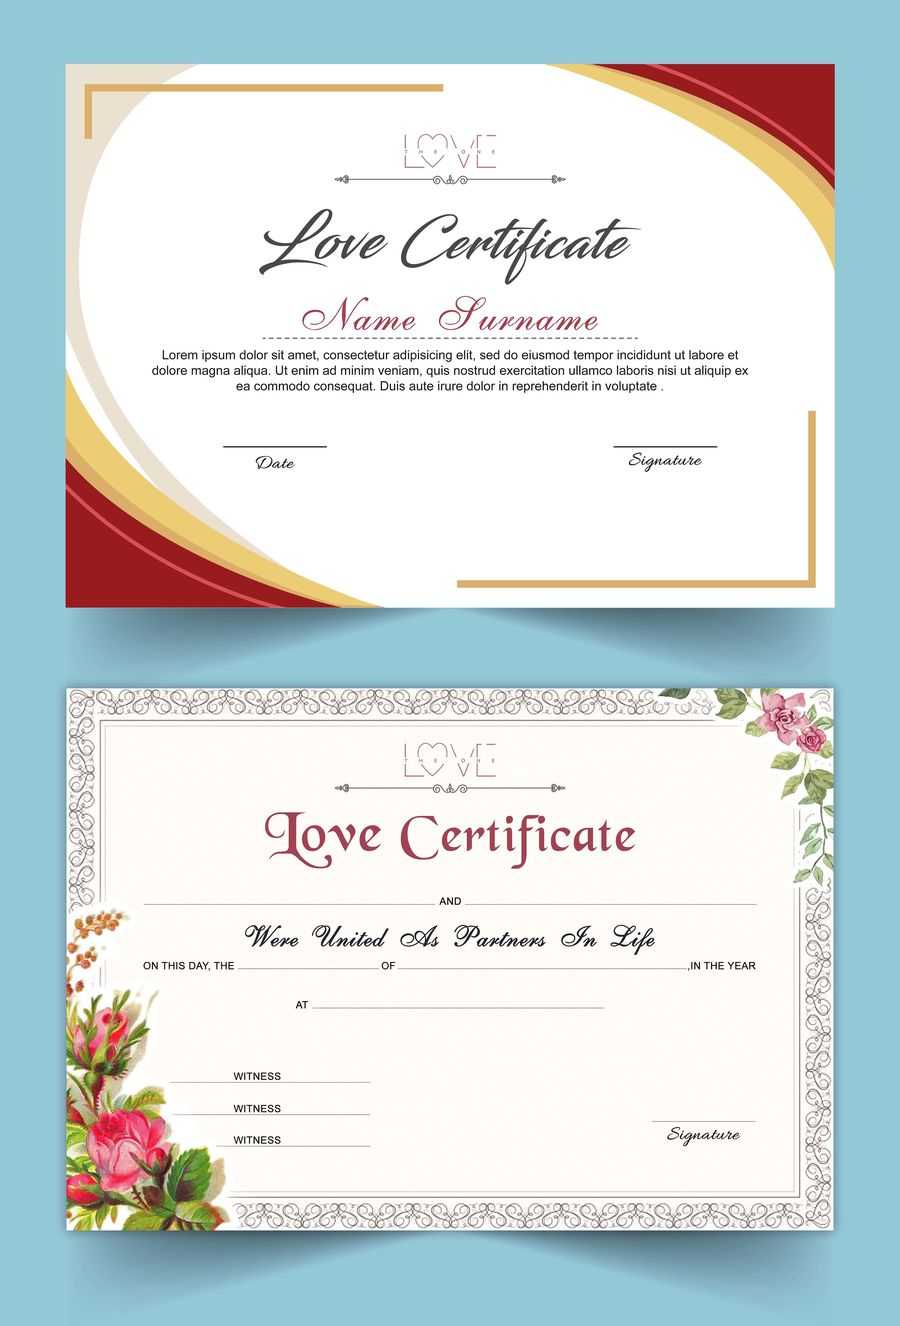 Entry #15Satishandsurabhi For Design A Love Certificate Within Love Certificate Templates